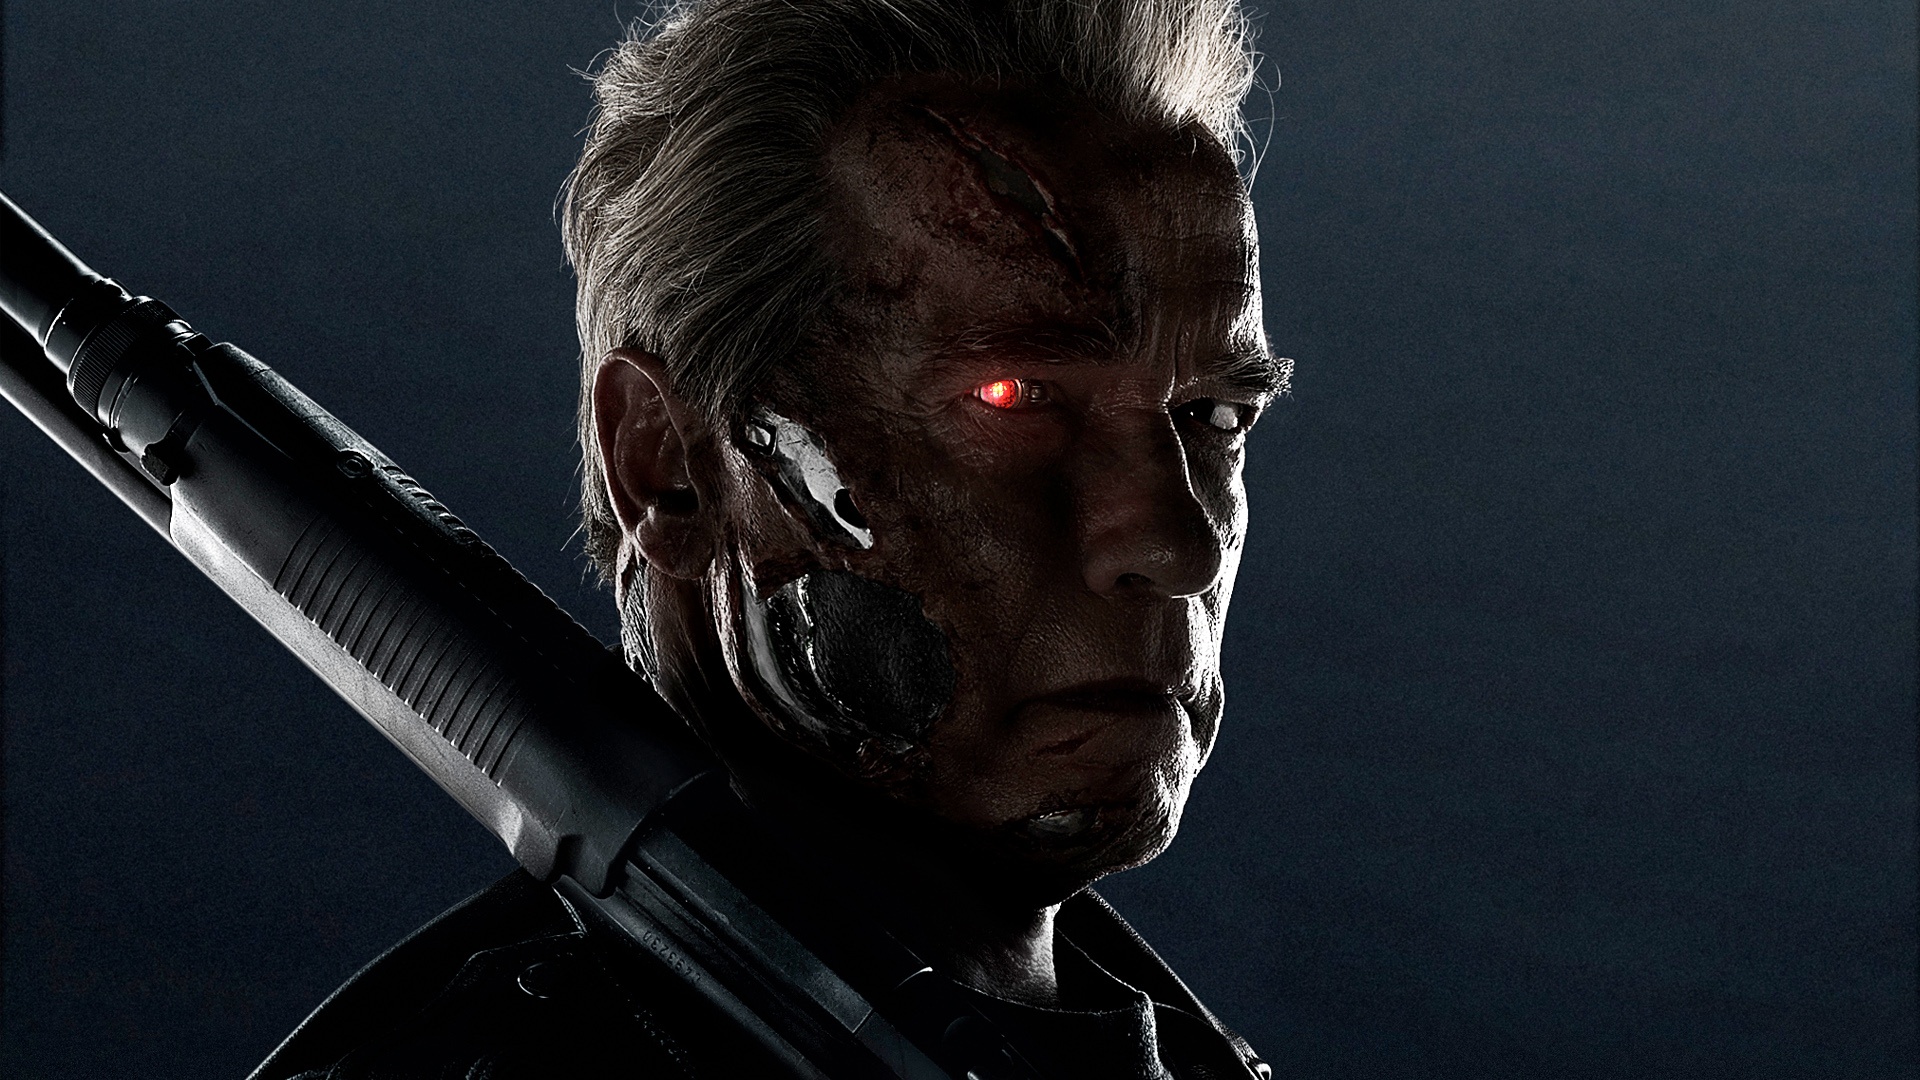 Arnold Terminator Genisys HD Wallpaper Search More High